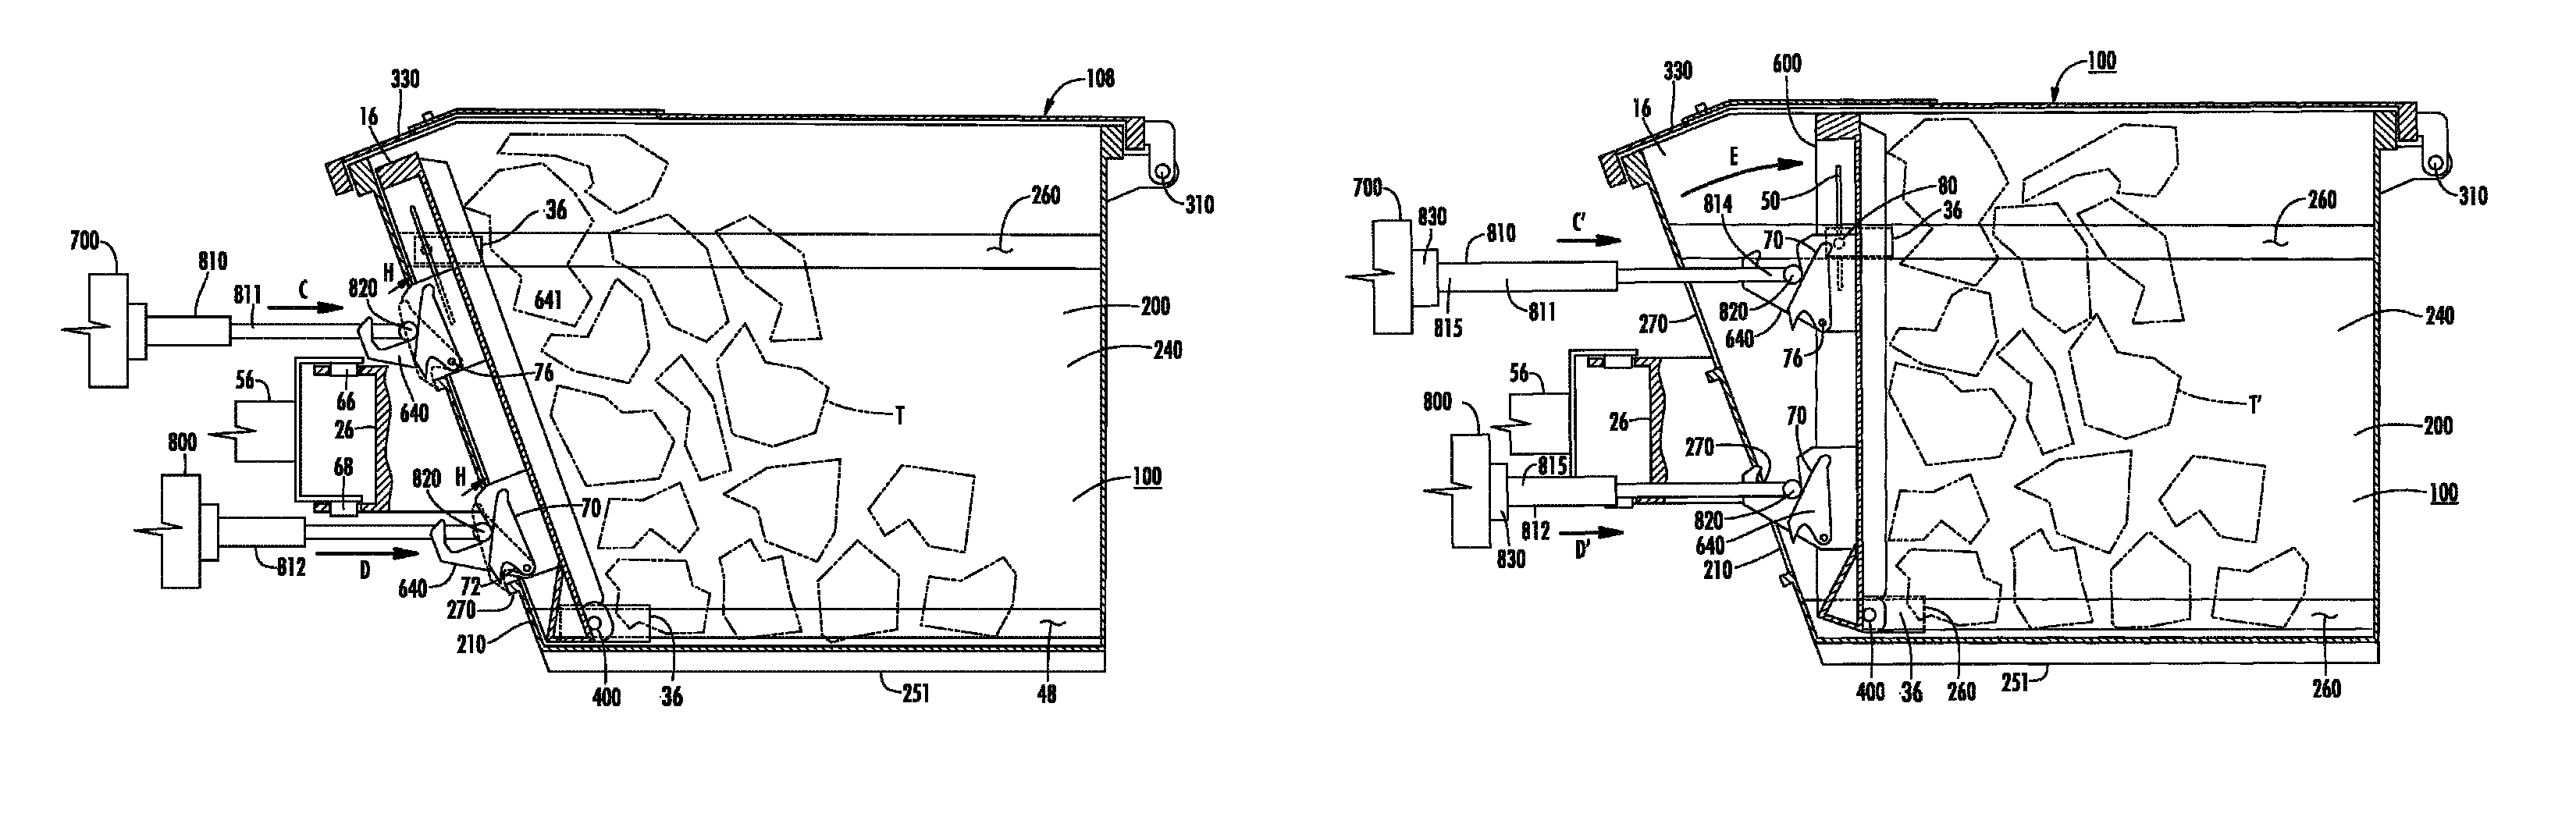 Trash receptacle for collecting and compacting waste and related method of use